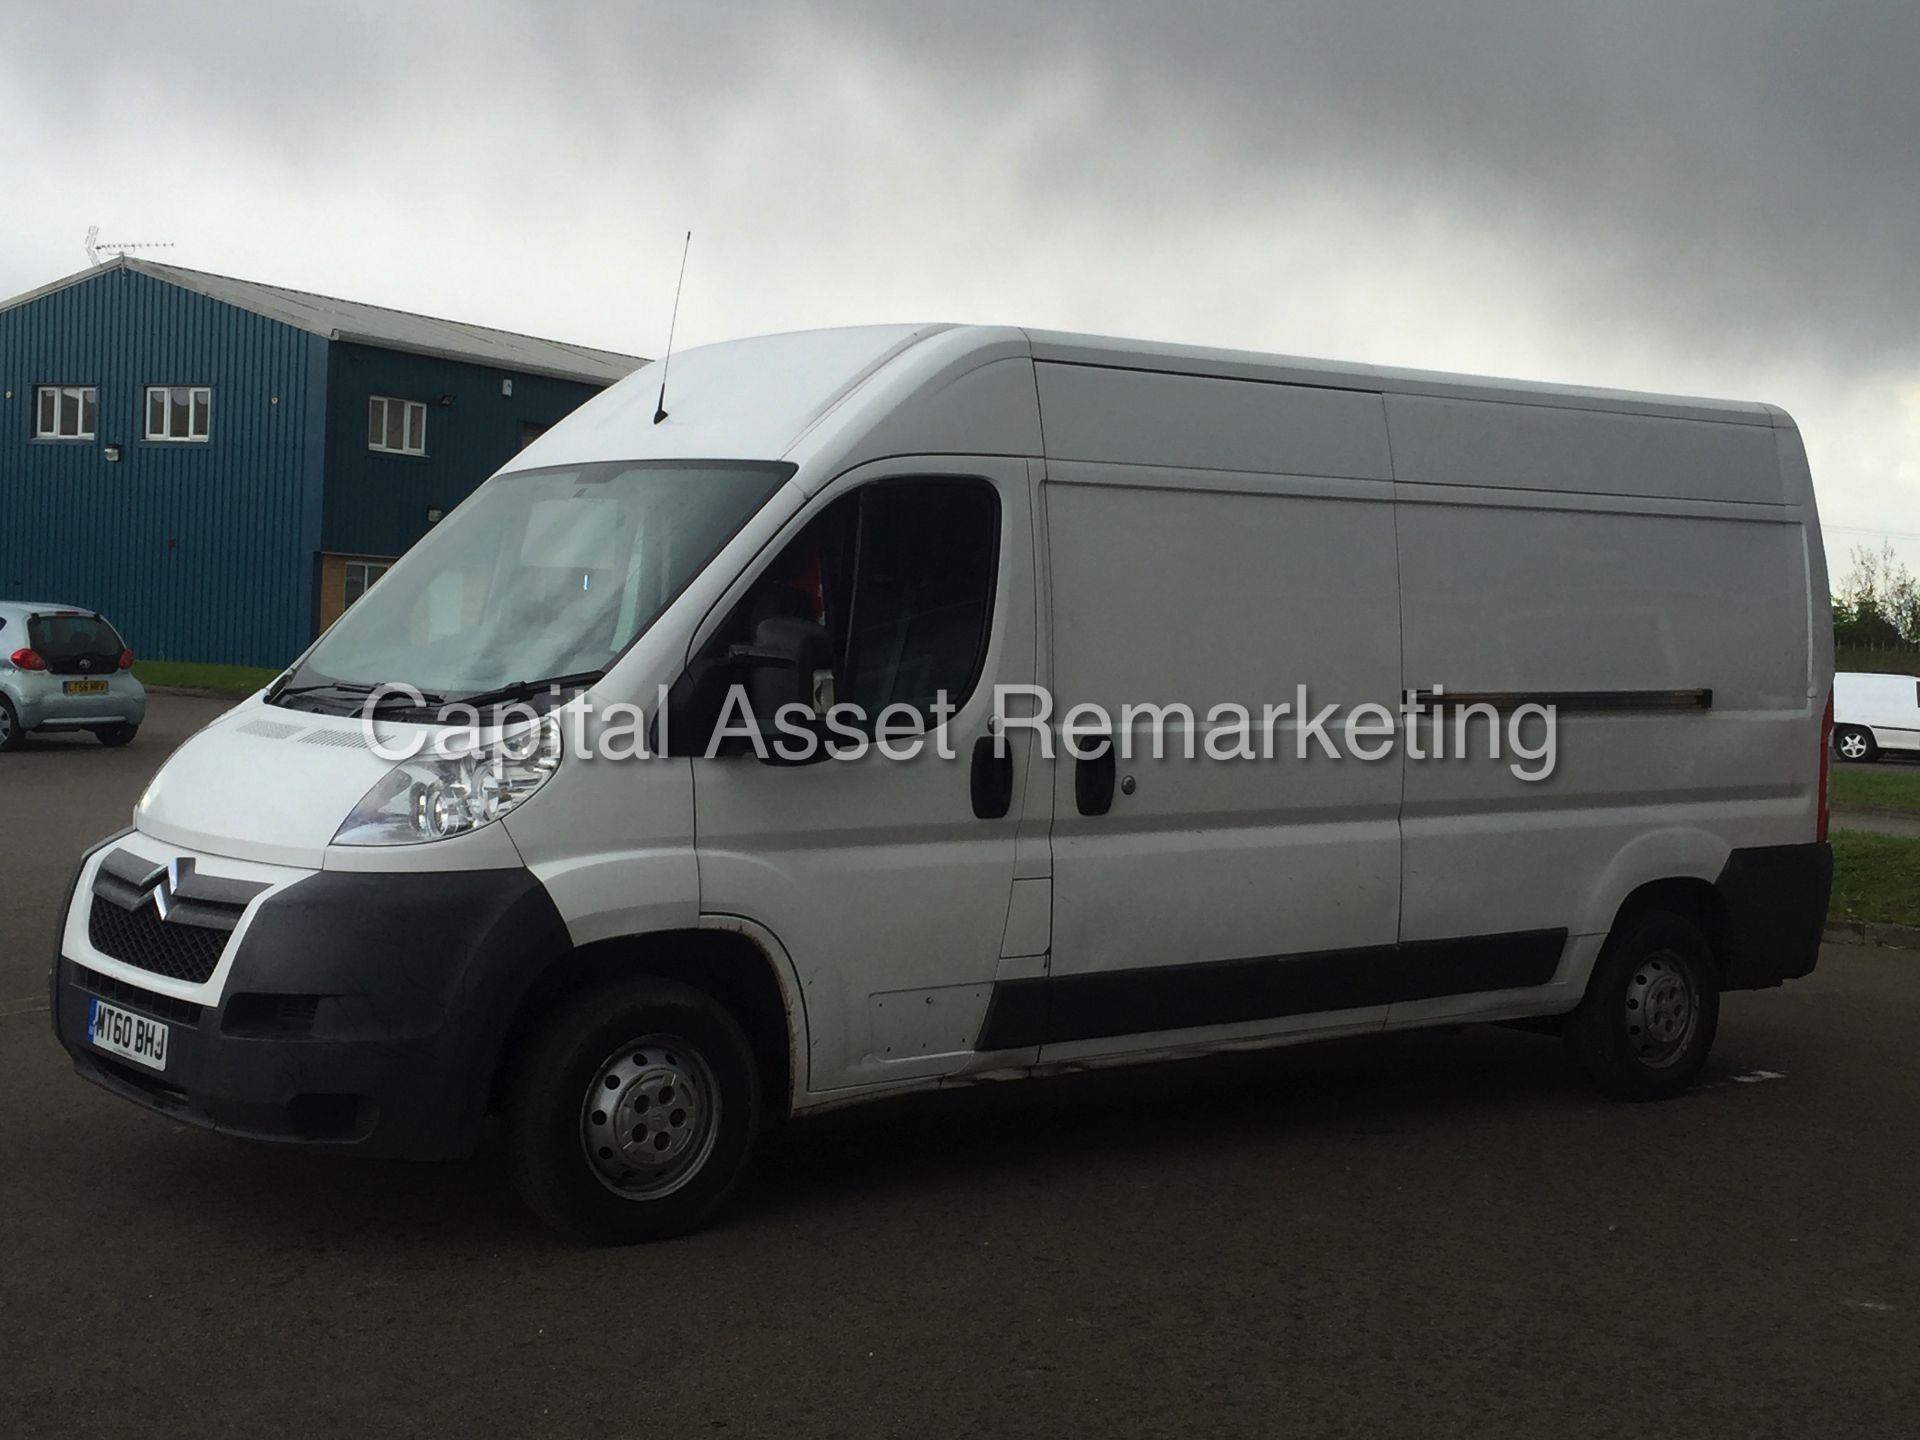 CITROEN RELAY 35 LWB HI-ROOF (2011 MODEL) 2.2 HDI - 120 PS - 6 SPEED (ELECTRIC PACK) - Image 5 of 19